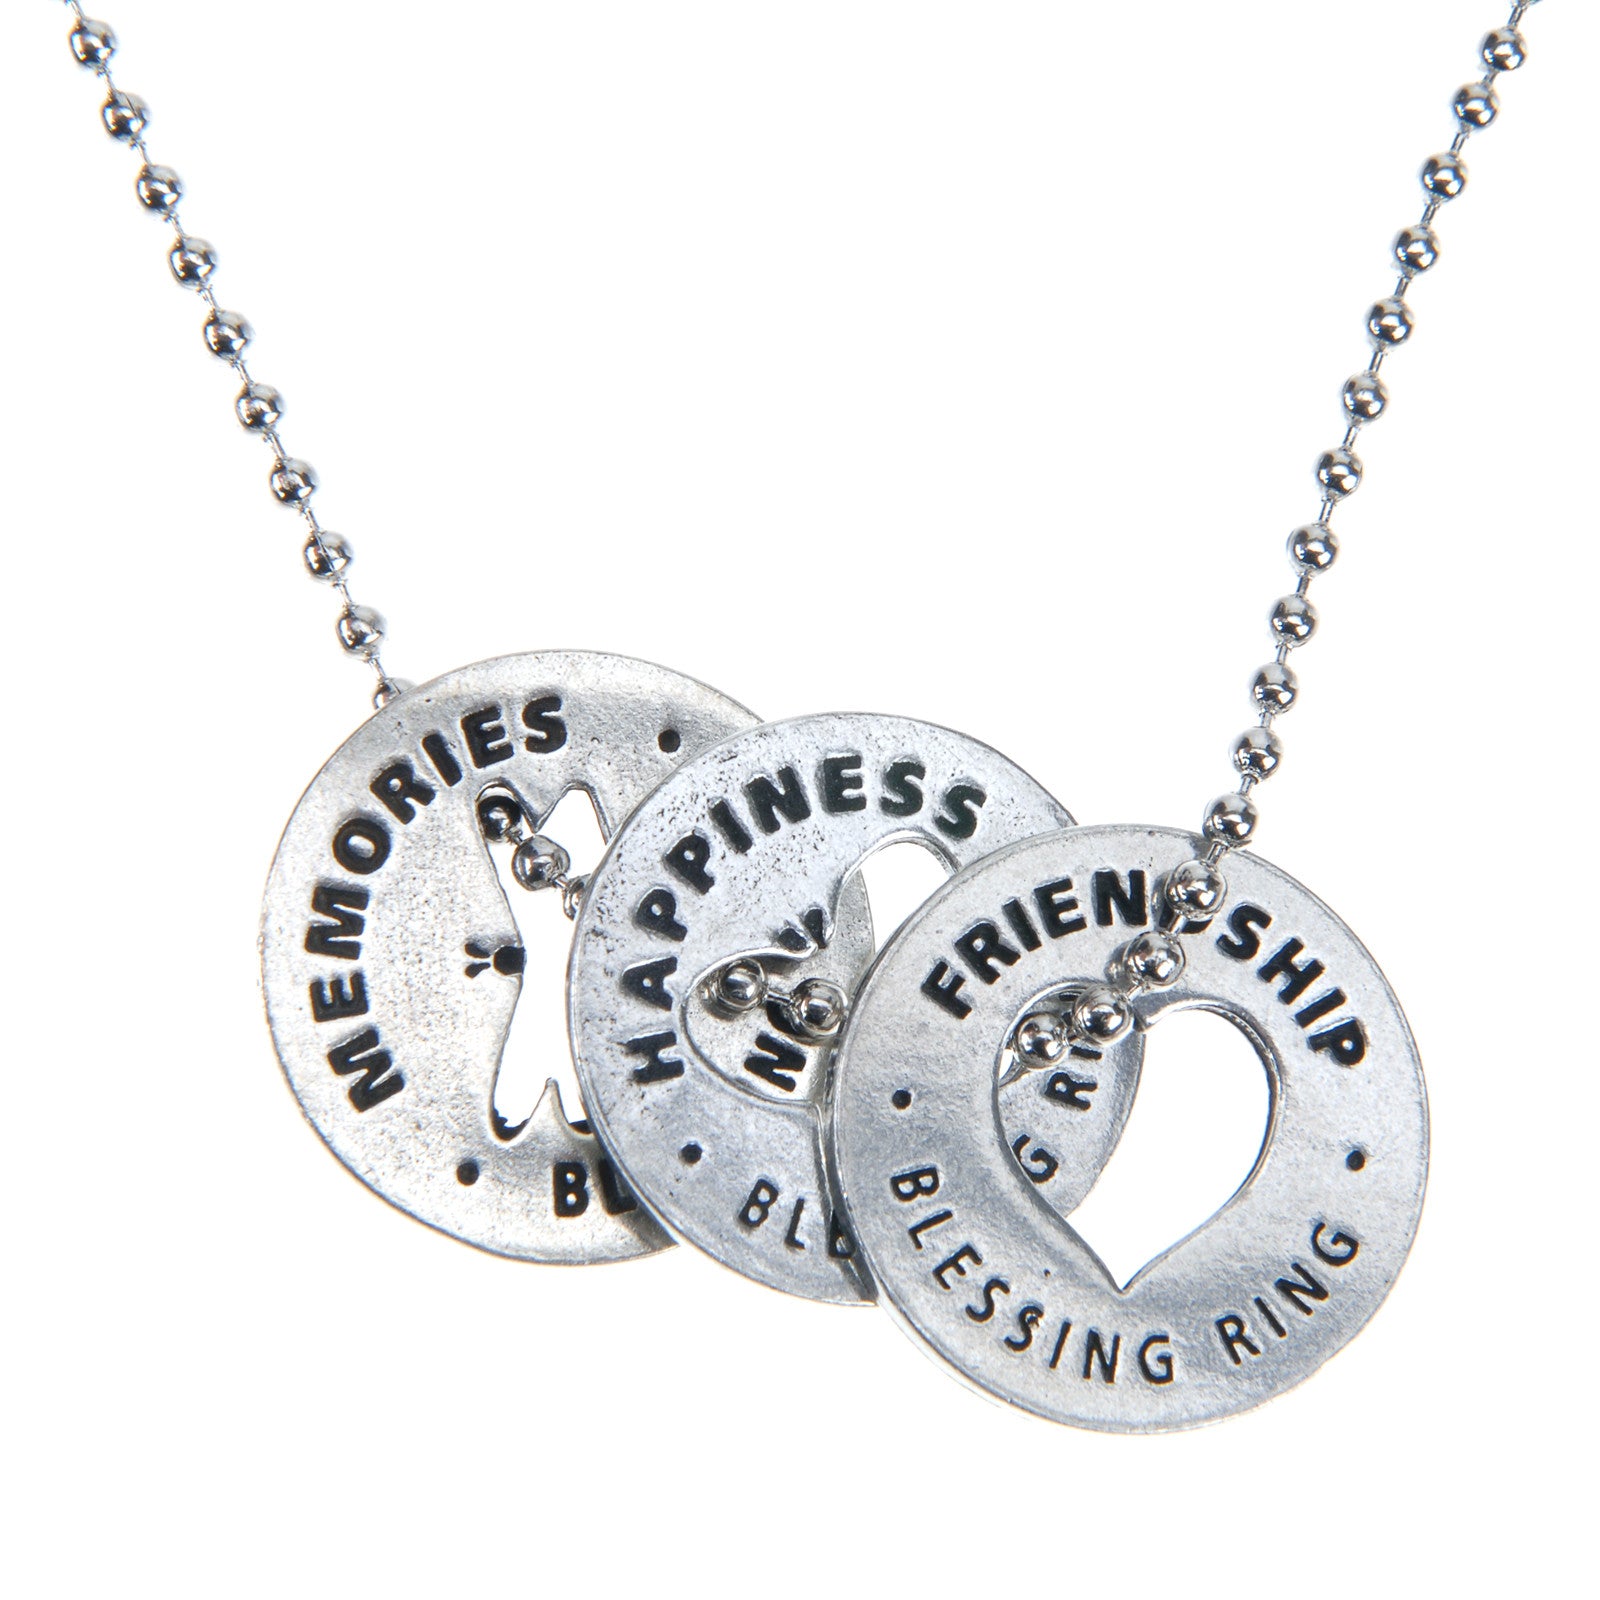 Blessing Rings on a necklace